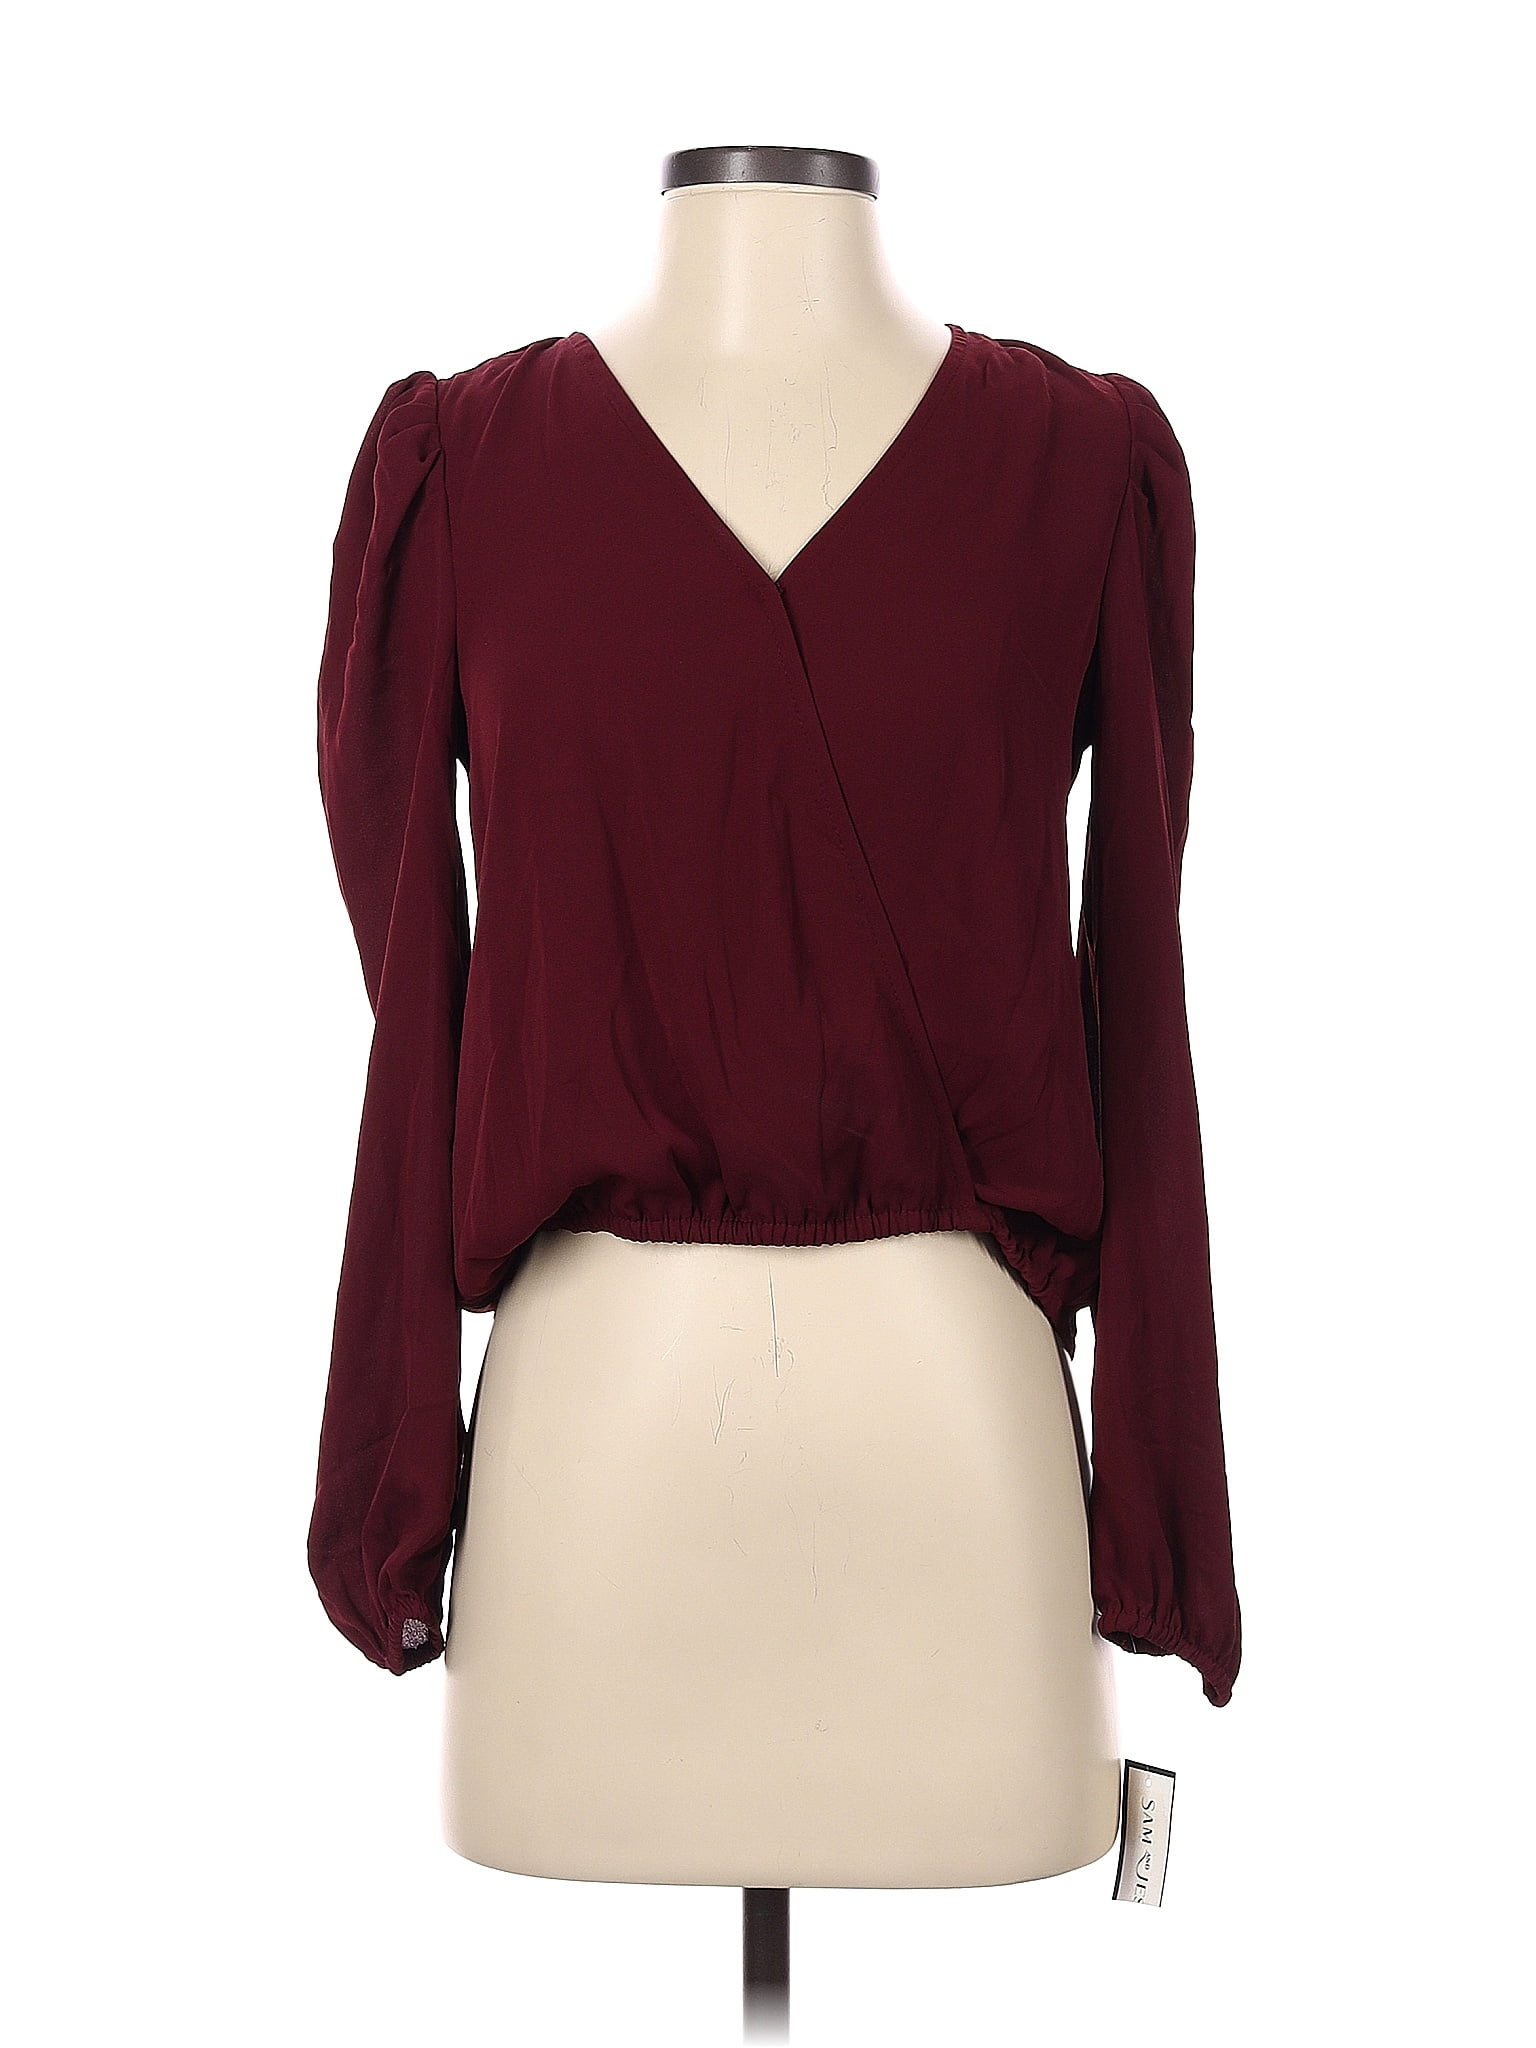 Lucky Brand 100% Polyester Purple Burgundy Long Sleeve Blouse Size S - 71%  off